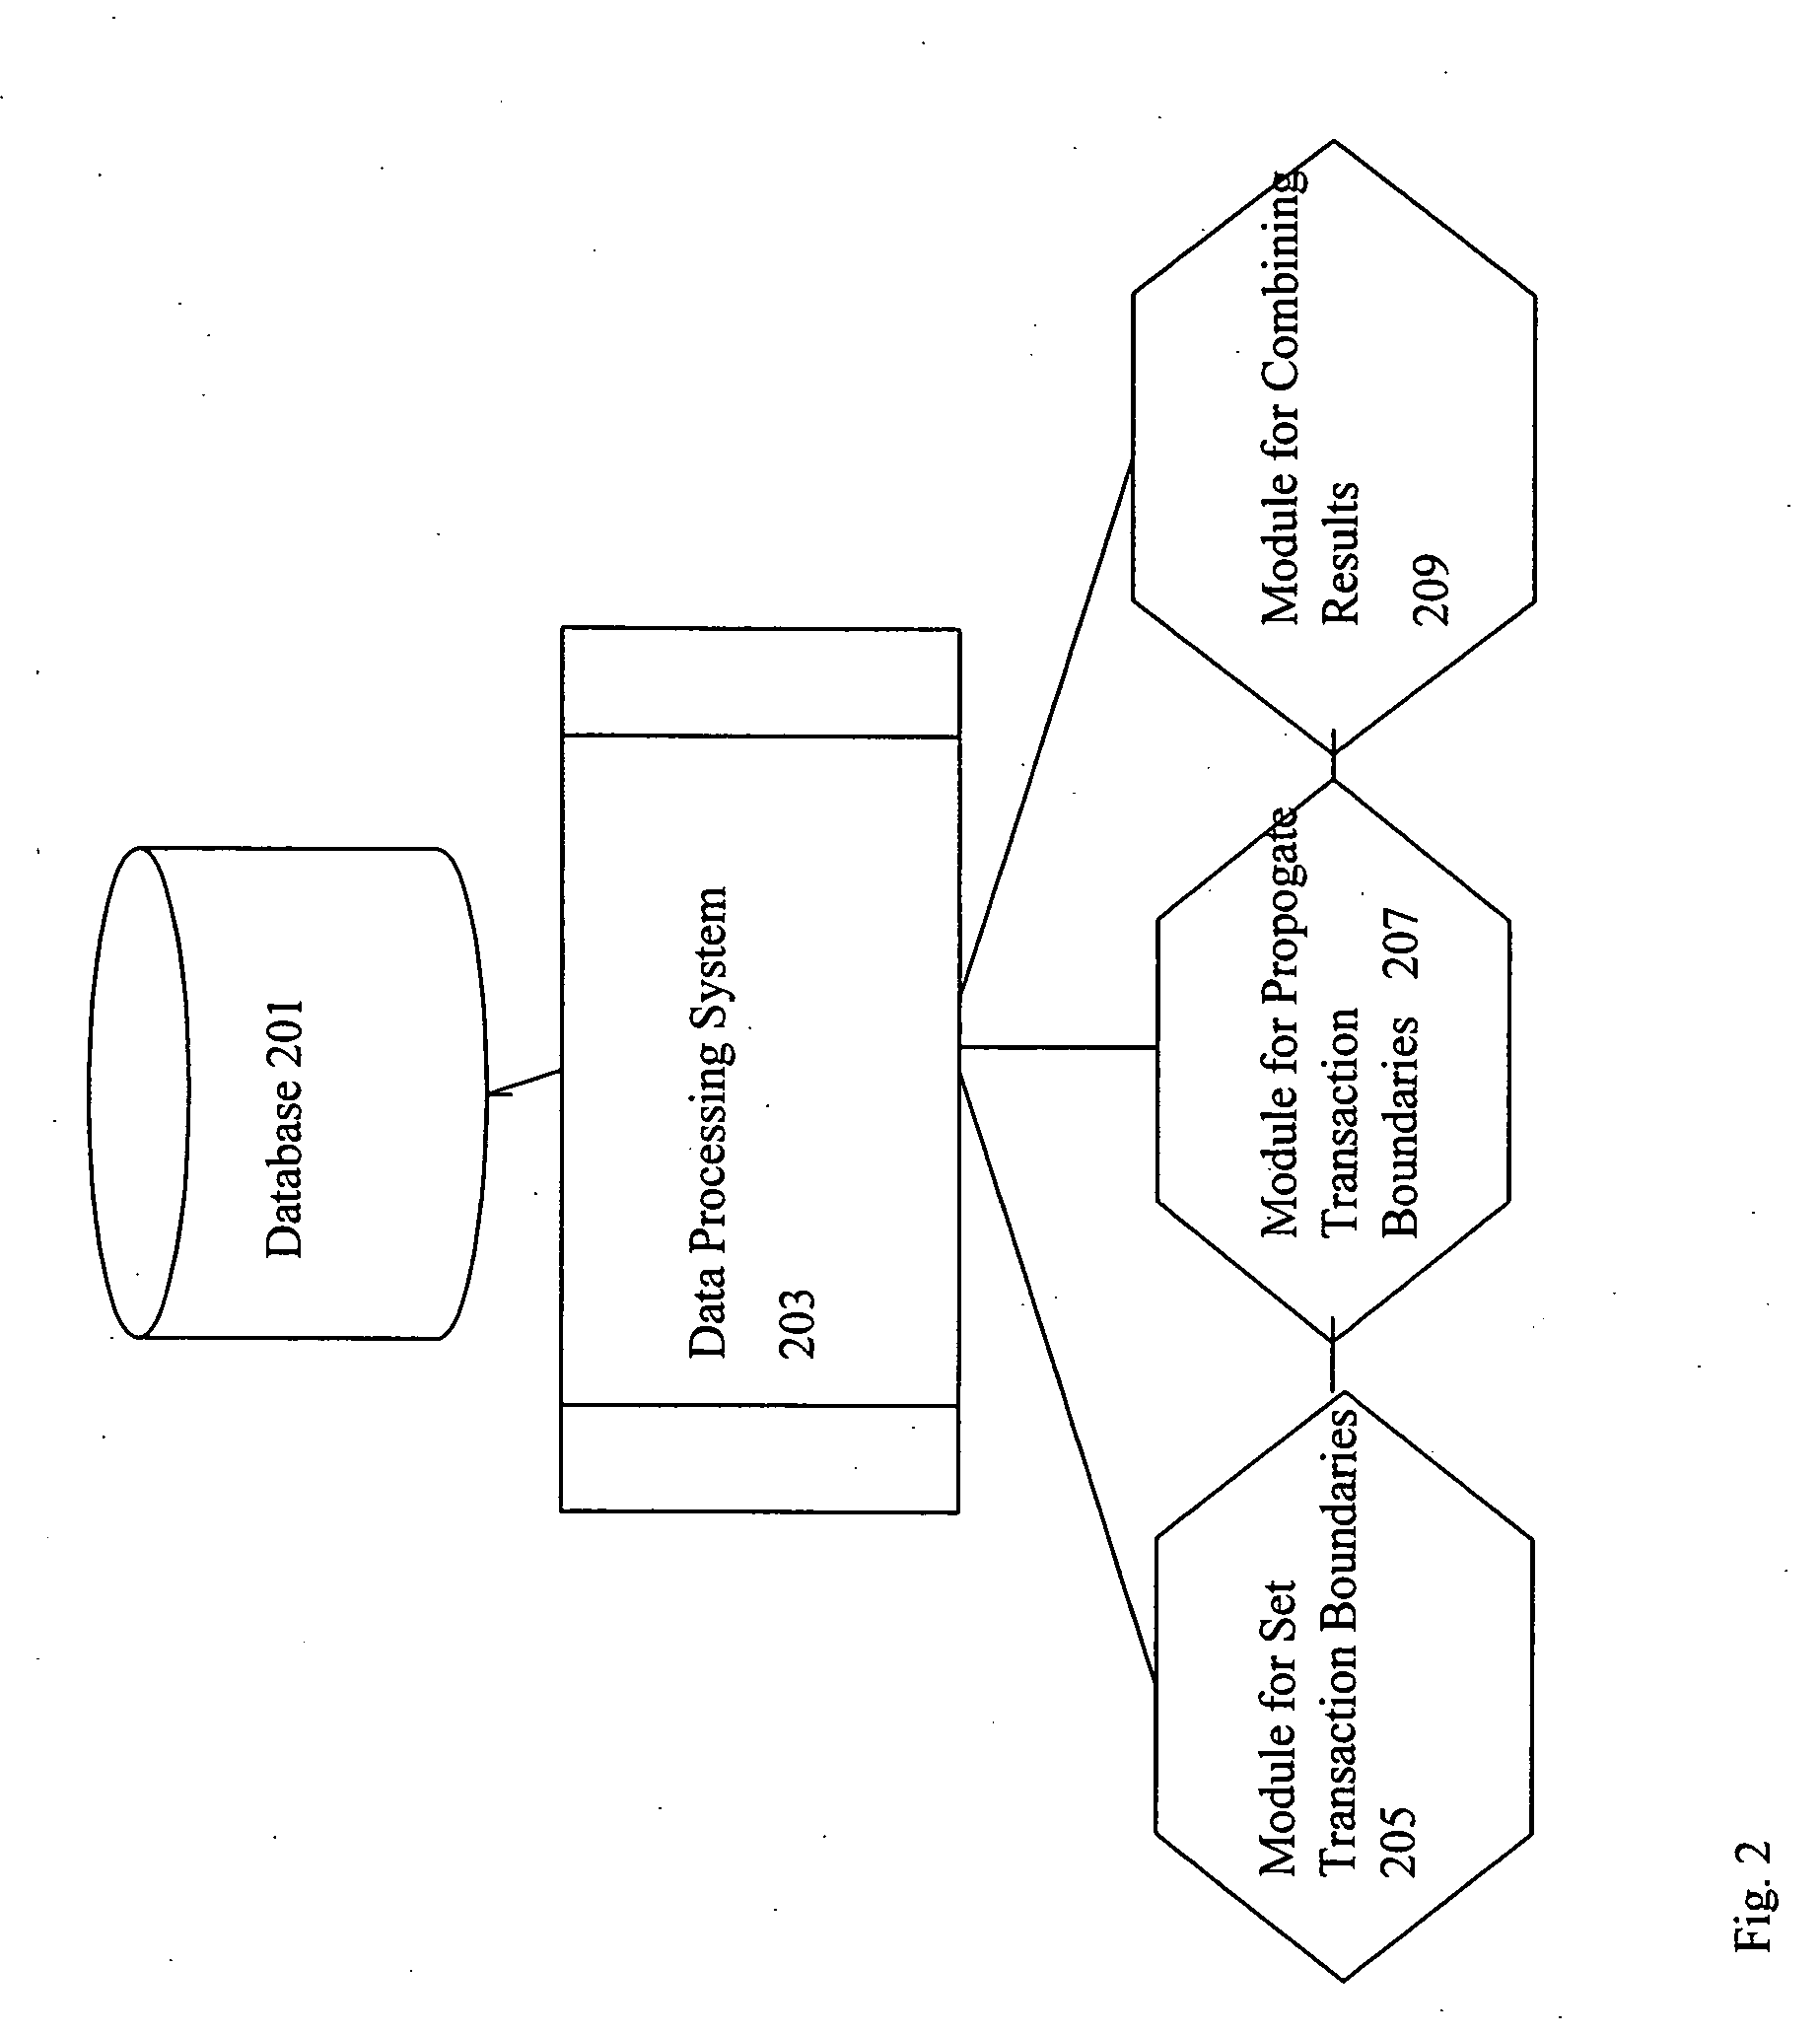 Set-oriented real-time data processing based on transaction boundaries